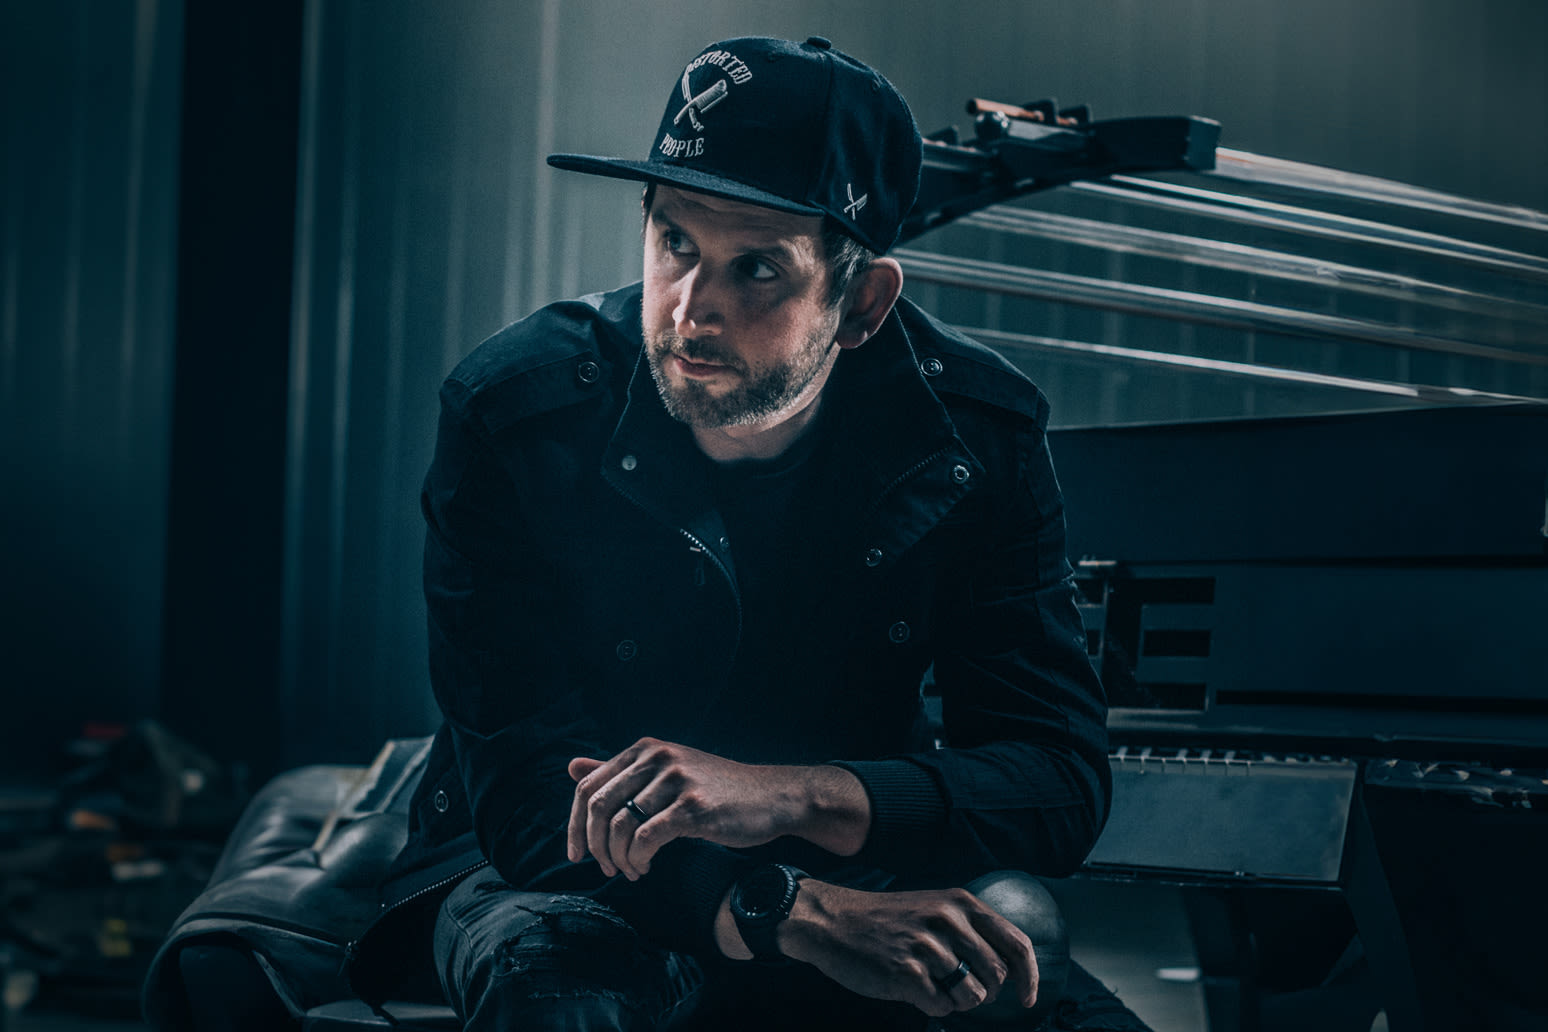 Watch Skylar Grey Cover Linkin Park’s ‘Numb’ for Tommee Profitt’s New Covers Album: Video Premiere